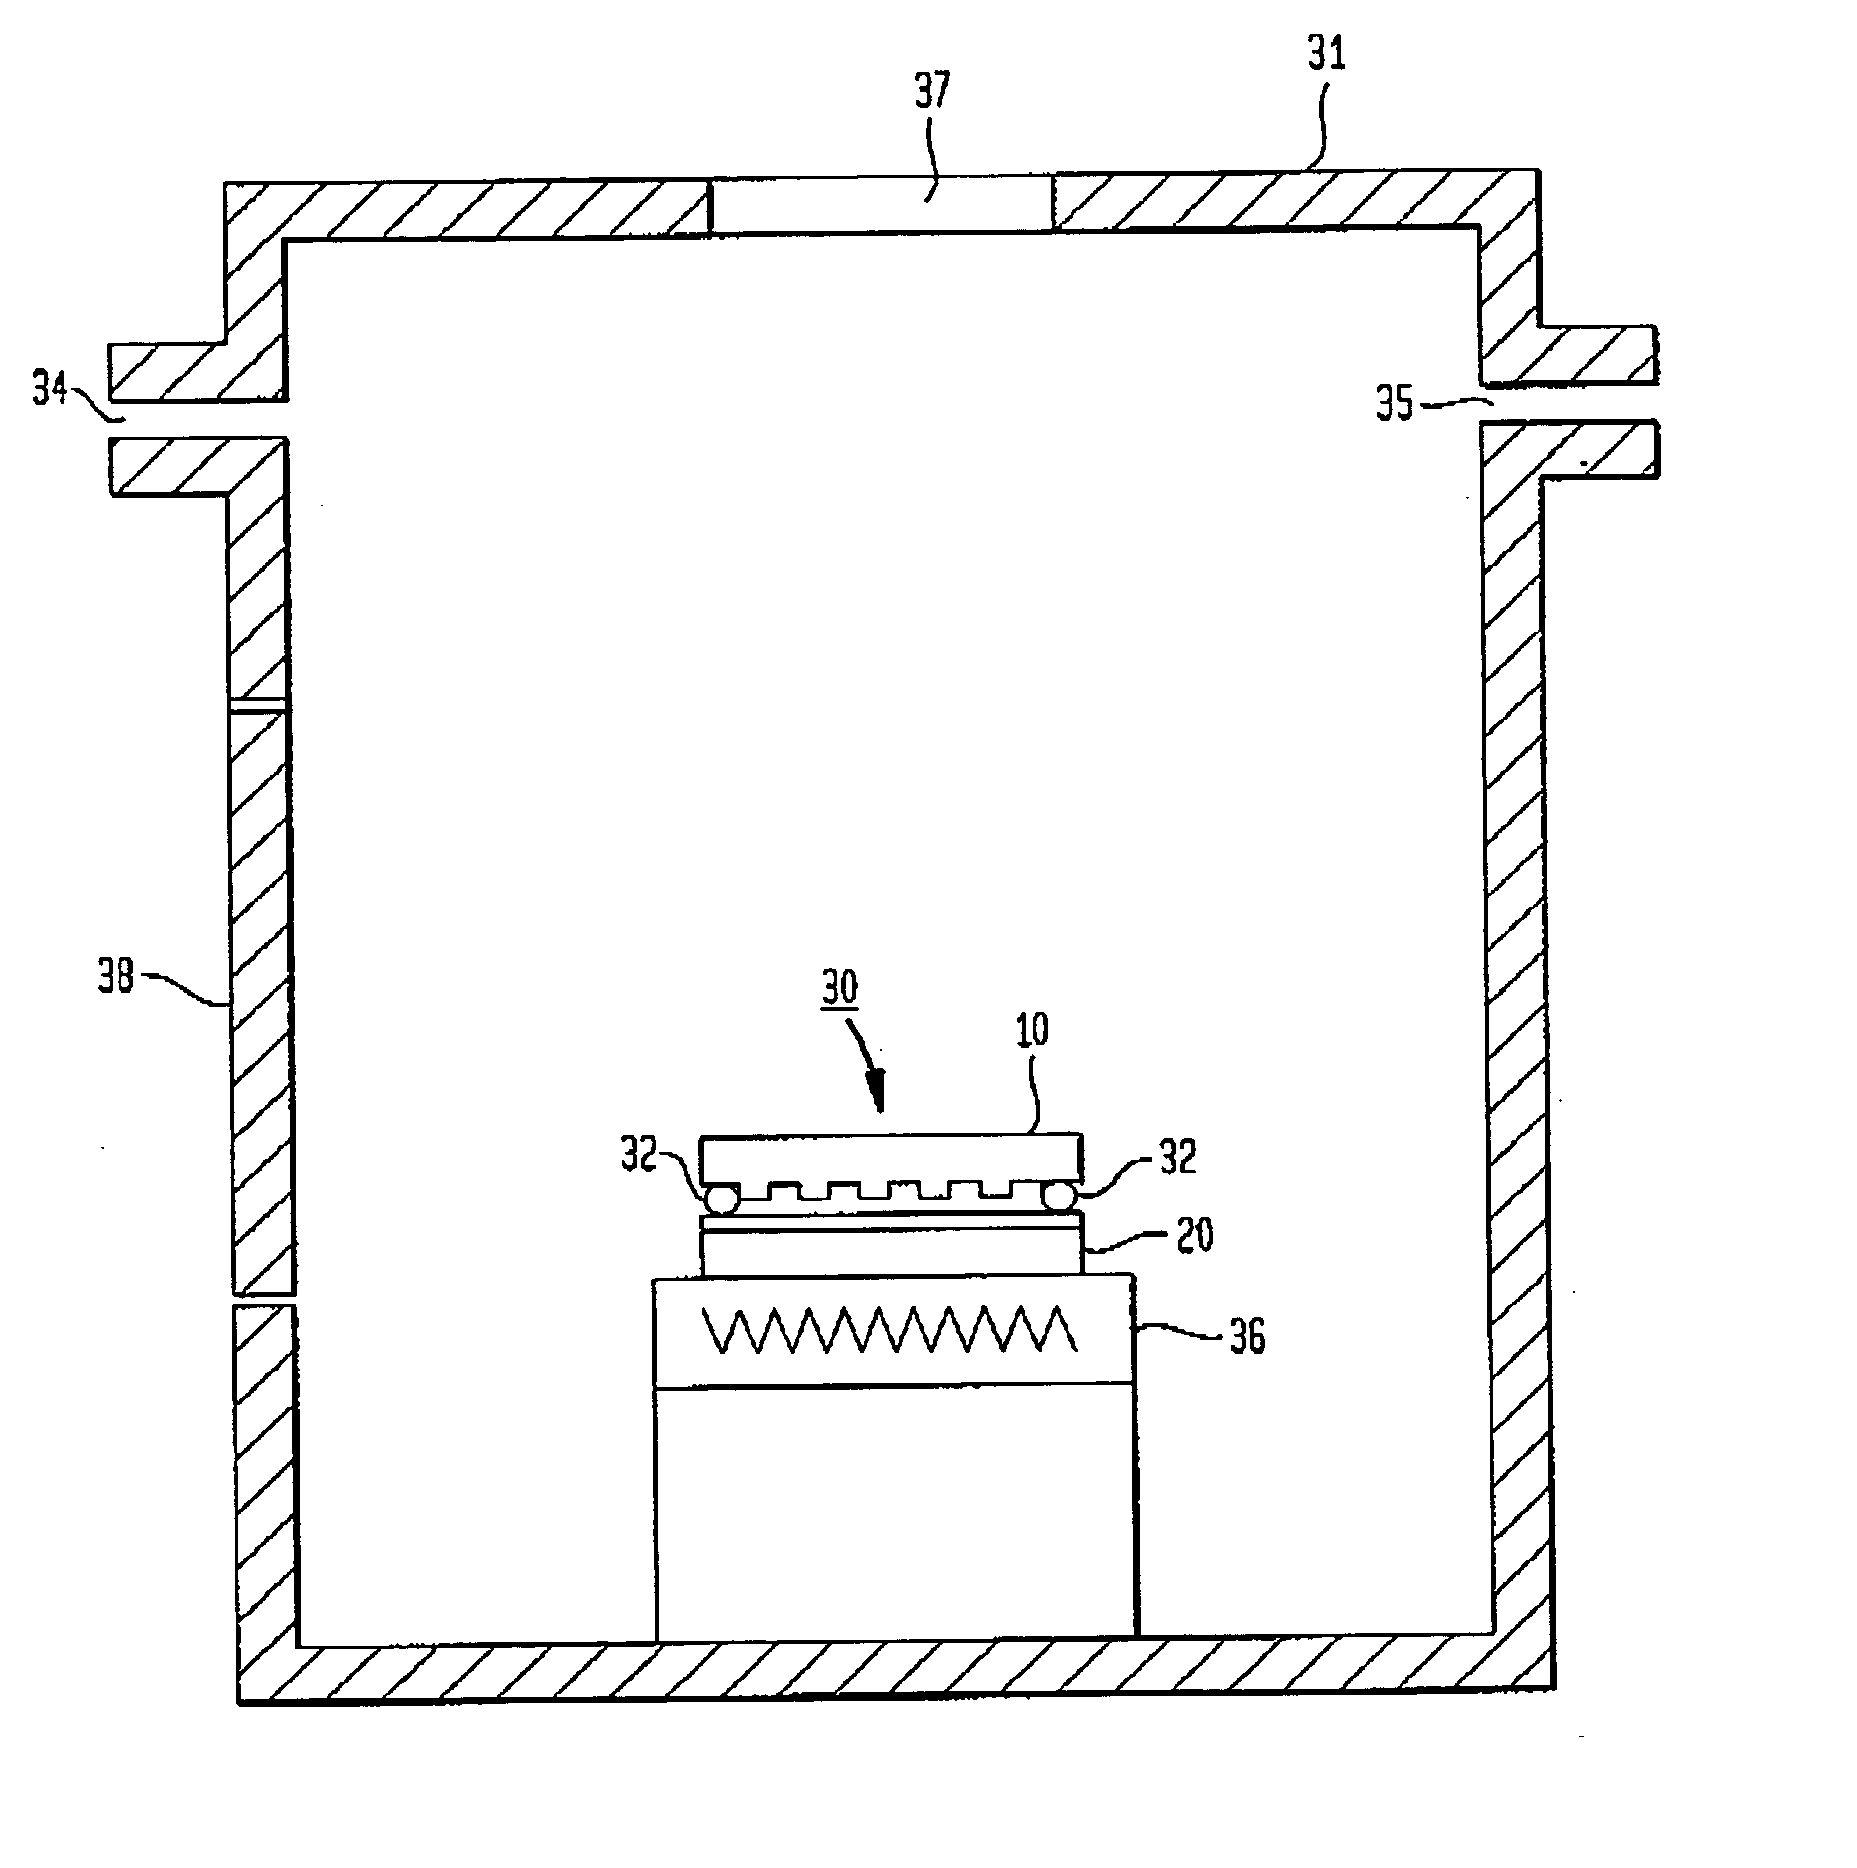 Apparatus for fluid pressure imprint lithography